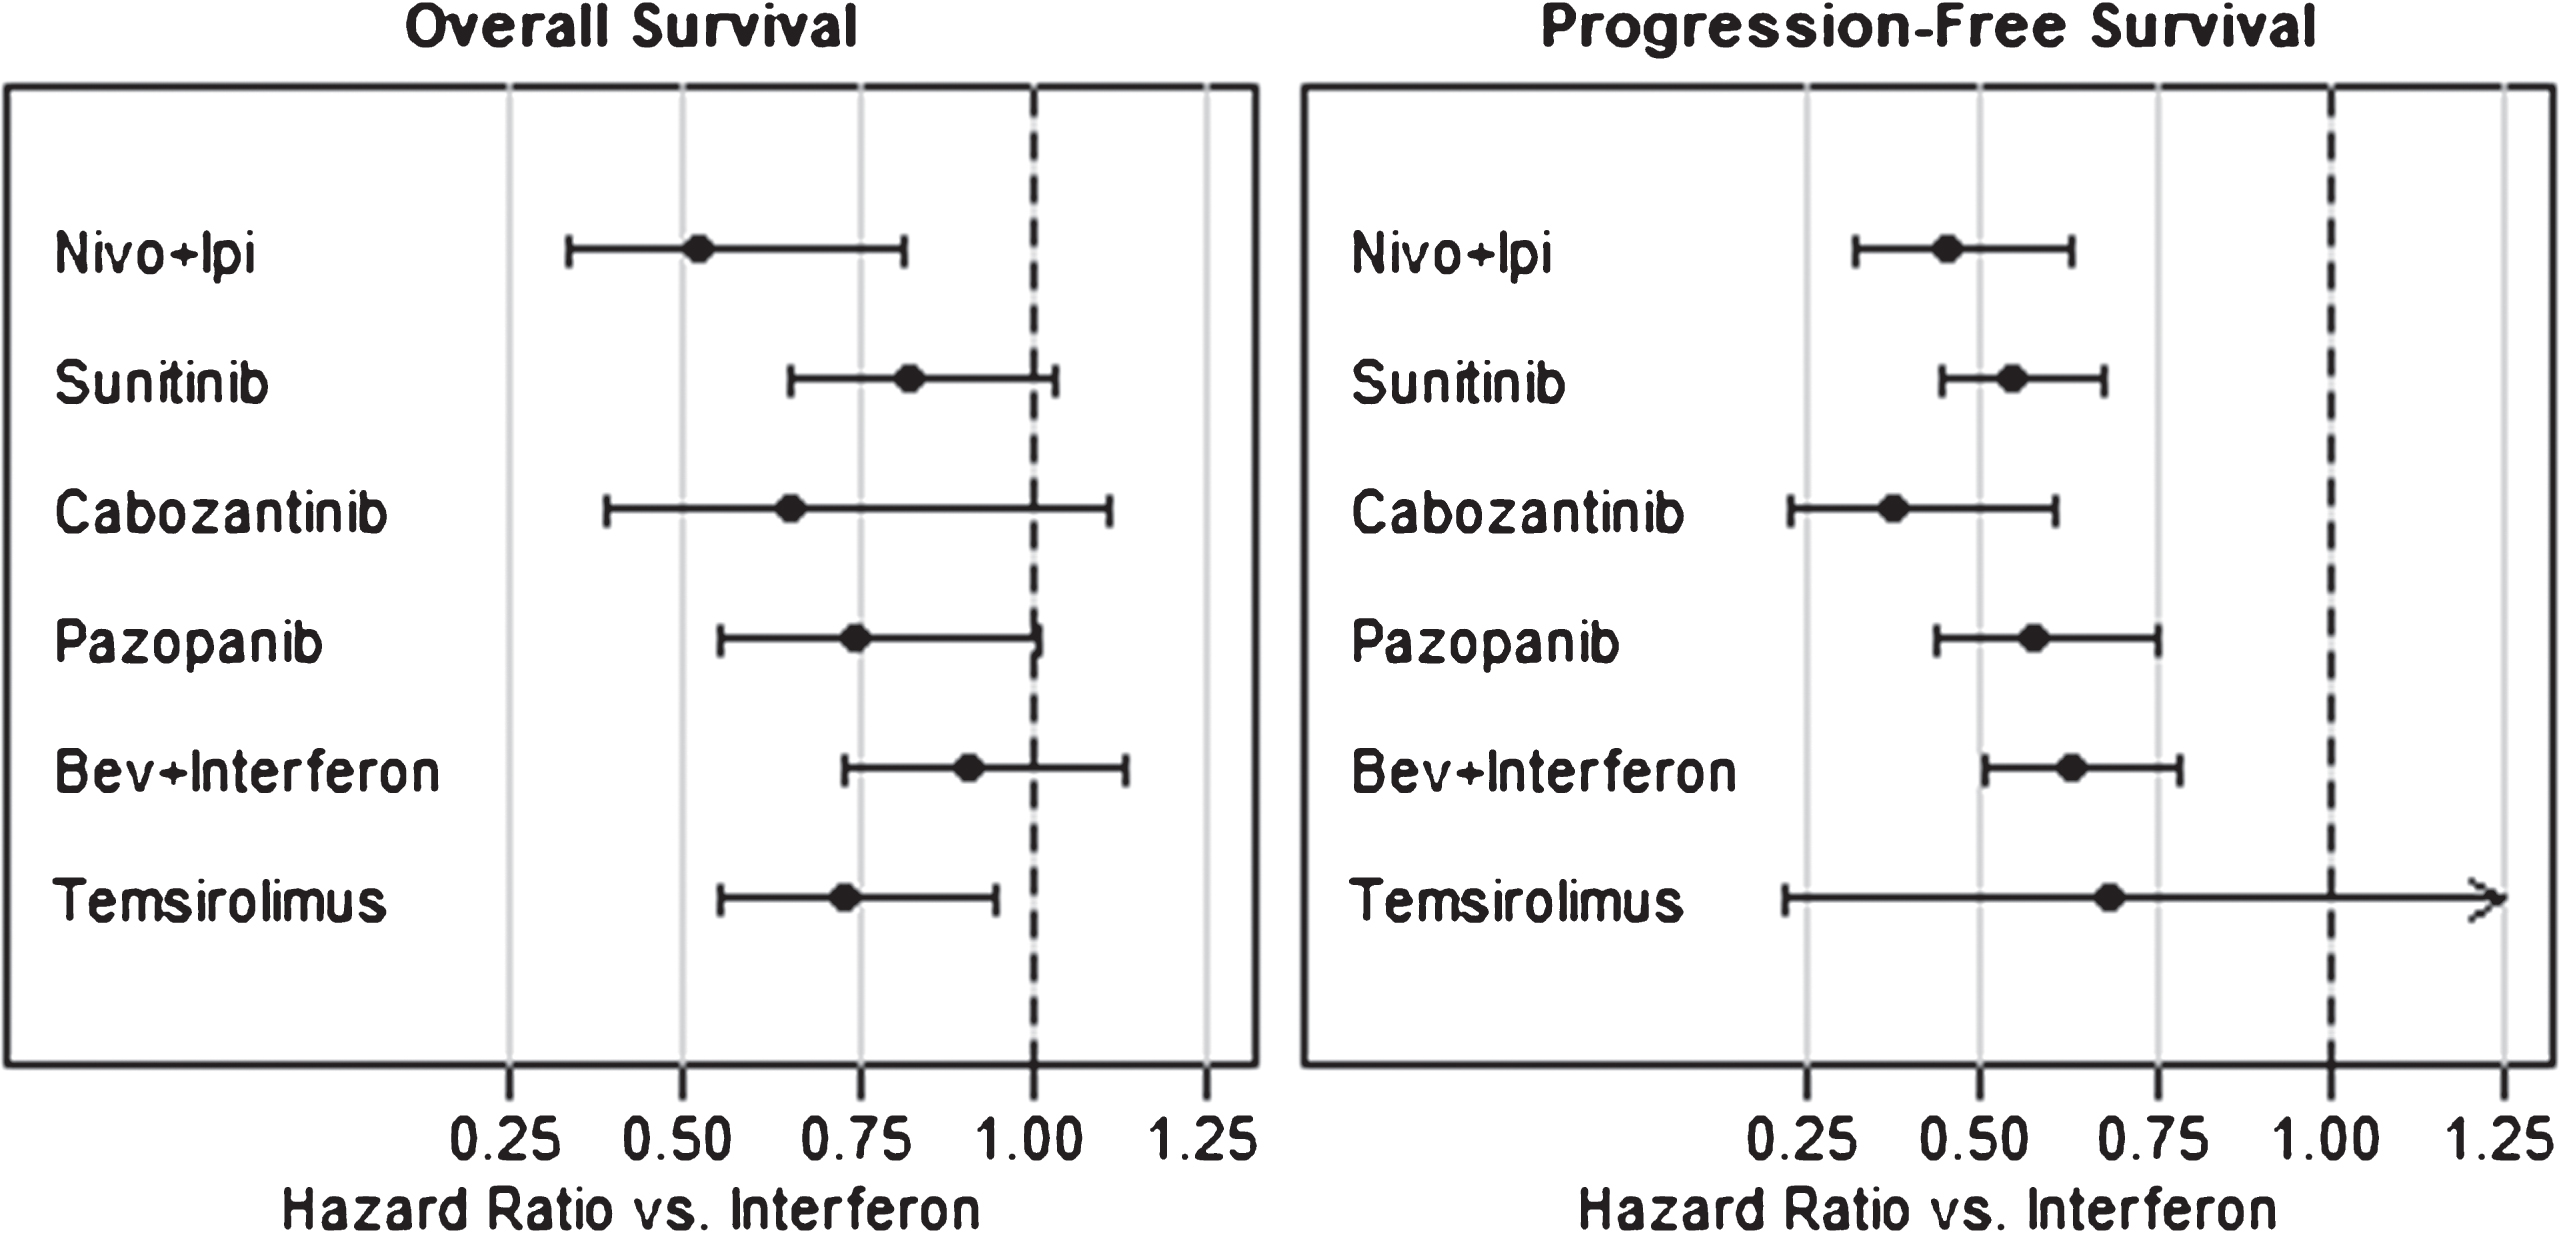 Hazard ratios for first-line mRCC therapies as compared to interferon.